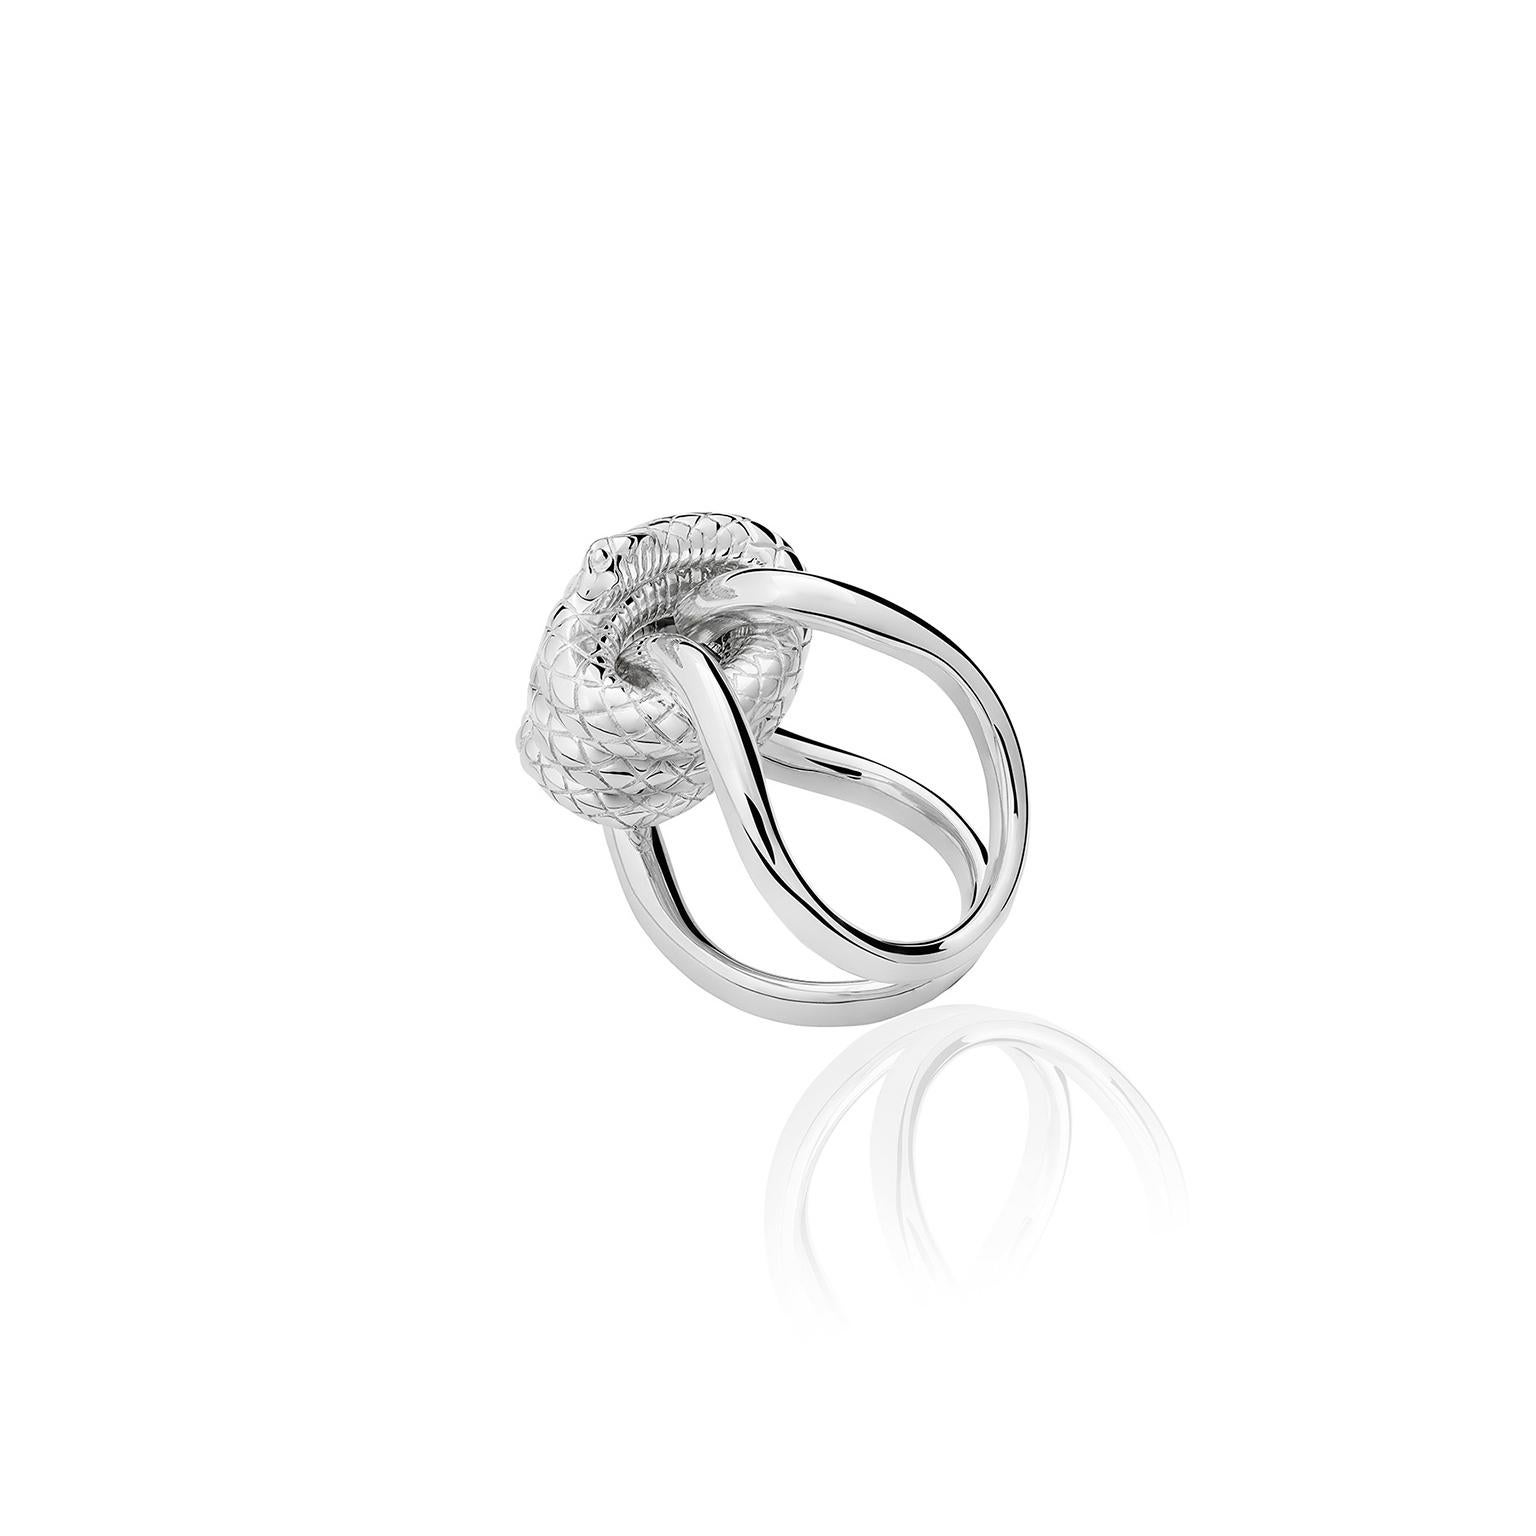 The Knotted Snake Ring from the Animal´s Collection by TANE is made of .925 Silver, it´s double polished silver body is joined at the top by a perfectly sculpted snake that is entangled in an elegant knot.  Handmade in Mexico.

To preserve the